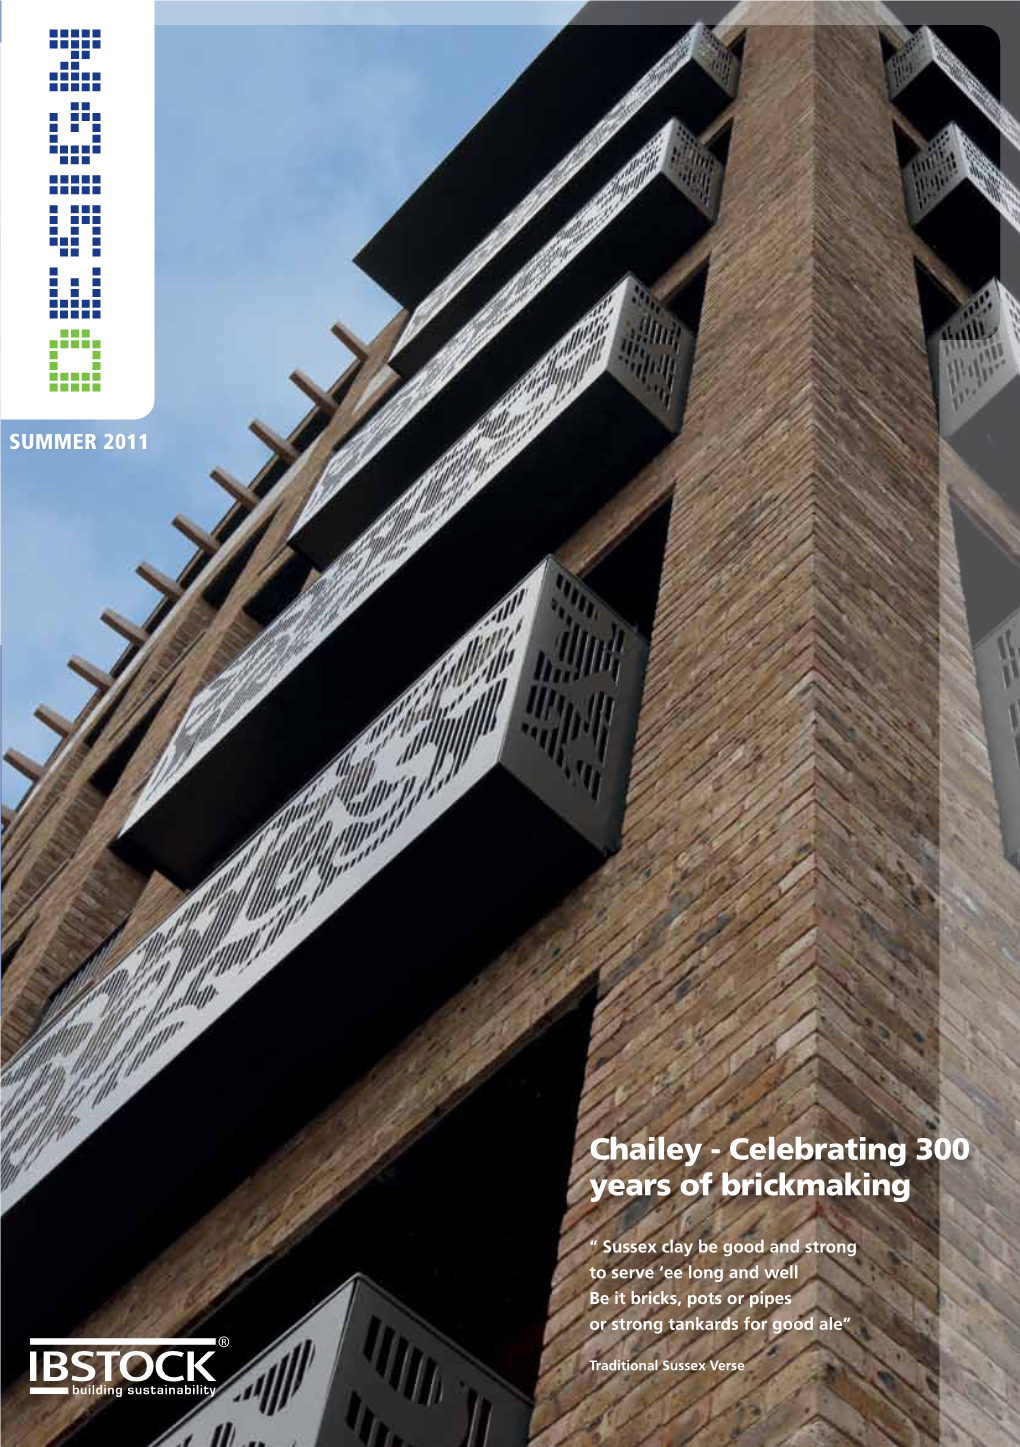 Chailey - Celebrating 300 Years of Brickmaking